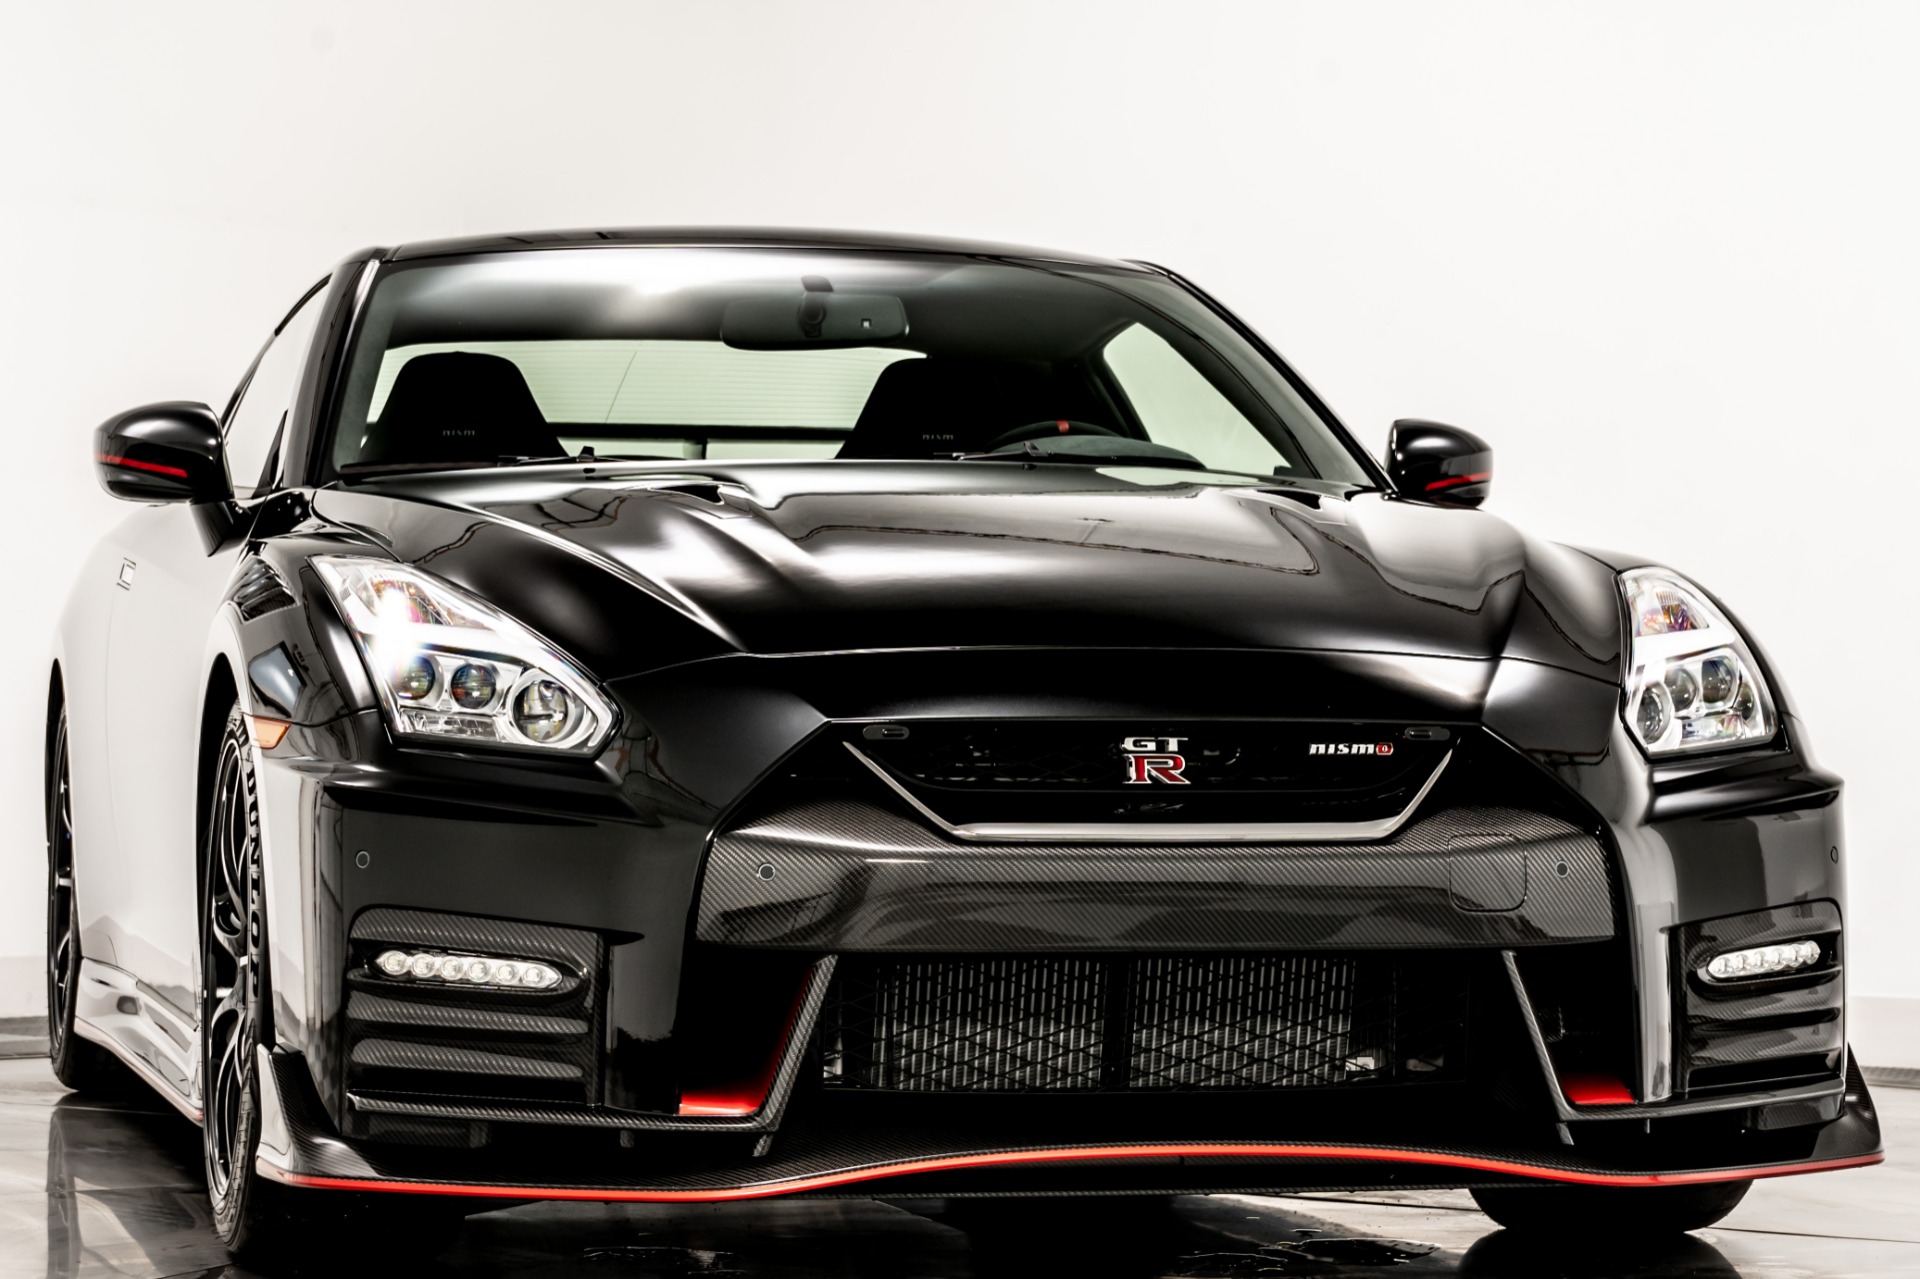 2015 NISSAN (R35) GT-R NISMO for sale by auction in Burton on